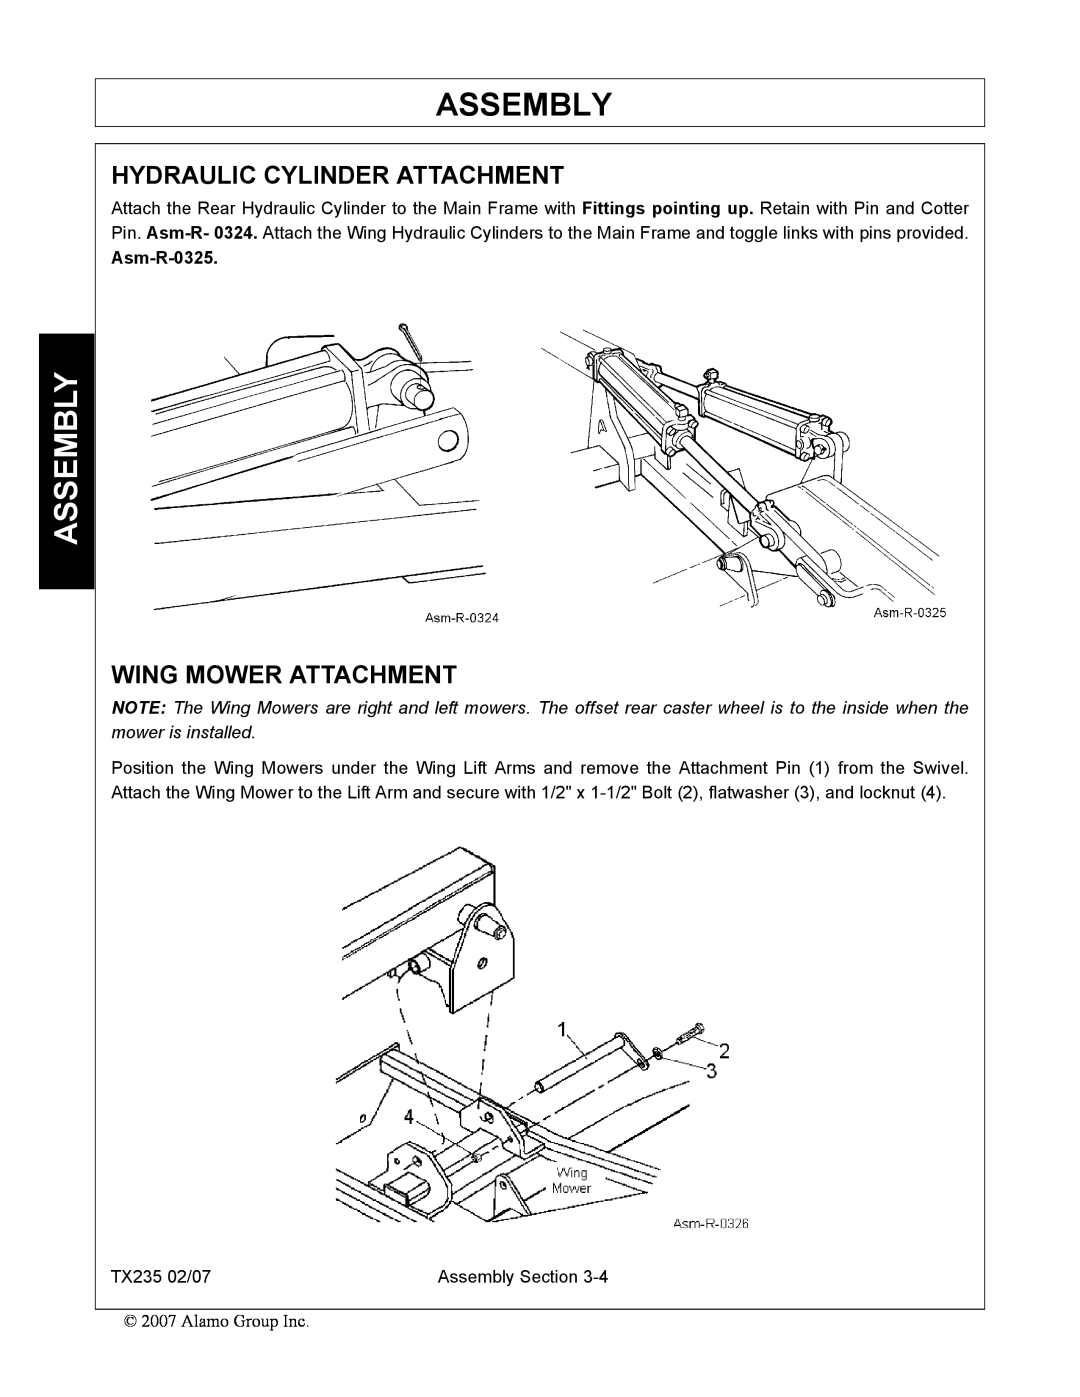 Alamo TX235 manual Hydraulic Cylinder Attachment, Wing Mower Attachment, Assembly, Asm-R-0325 